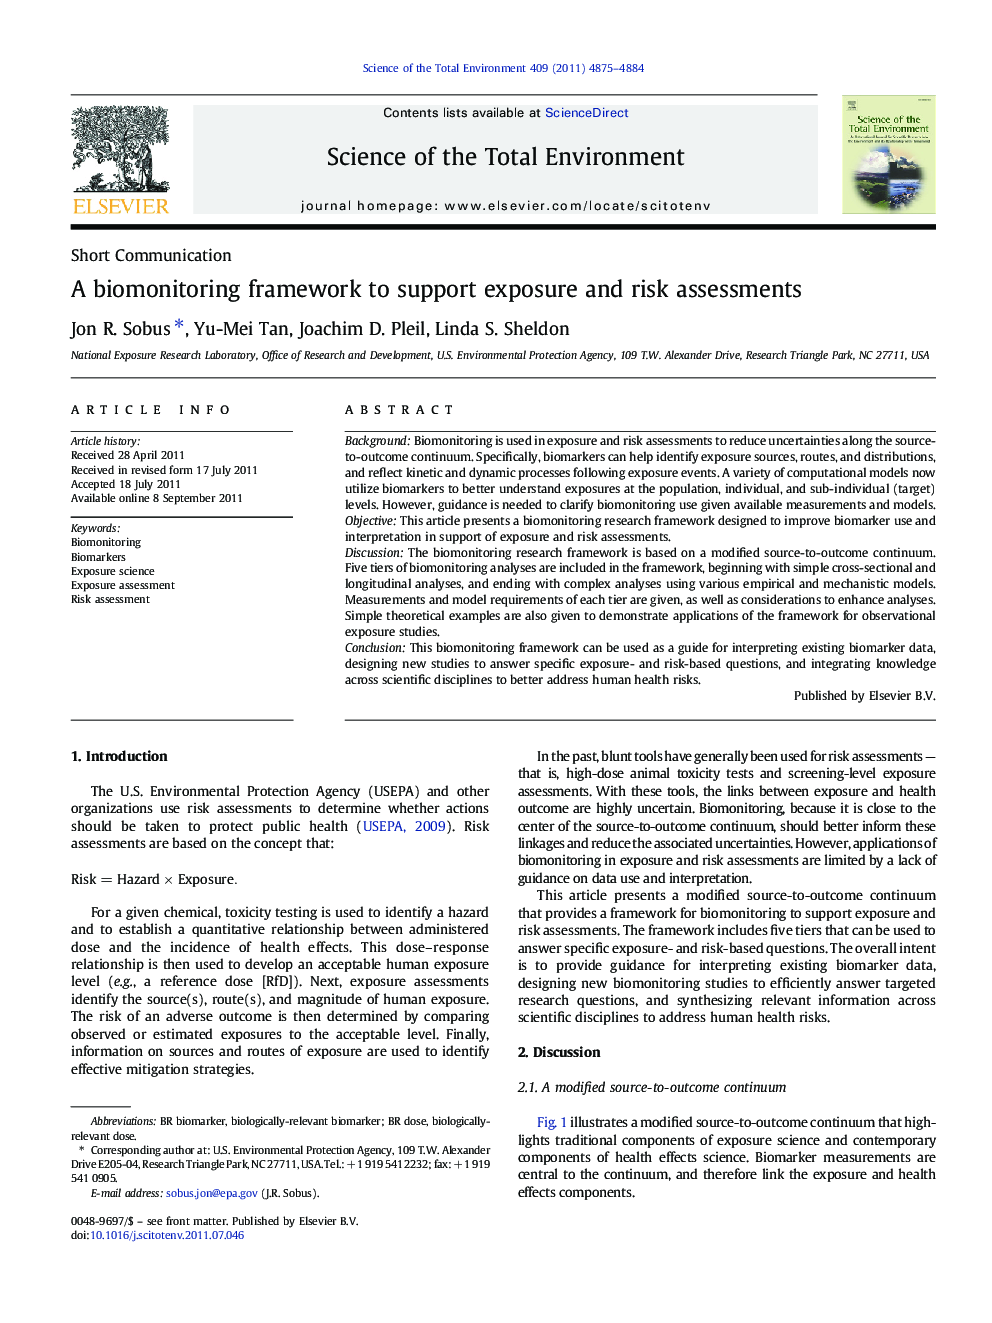 A biomonitoring framework to support exposure and risk assessments